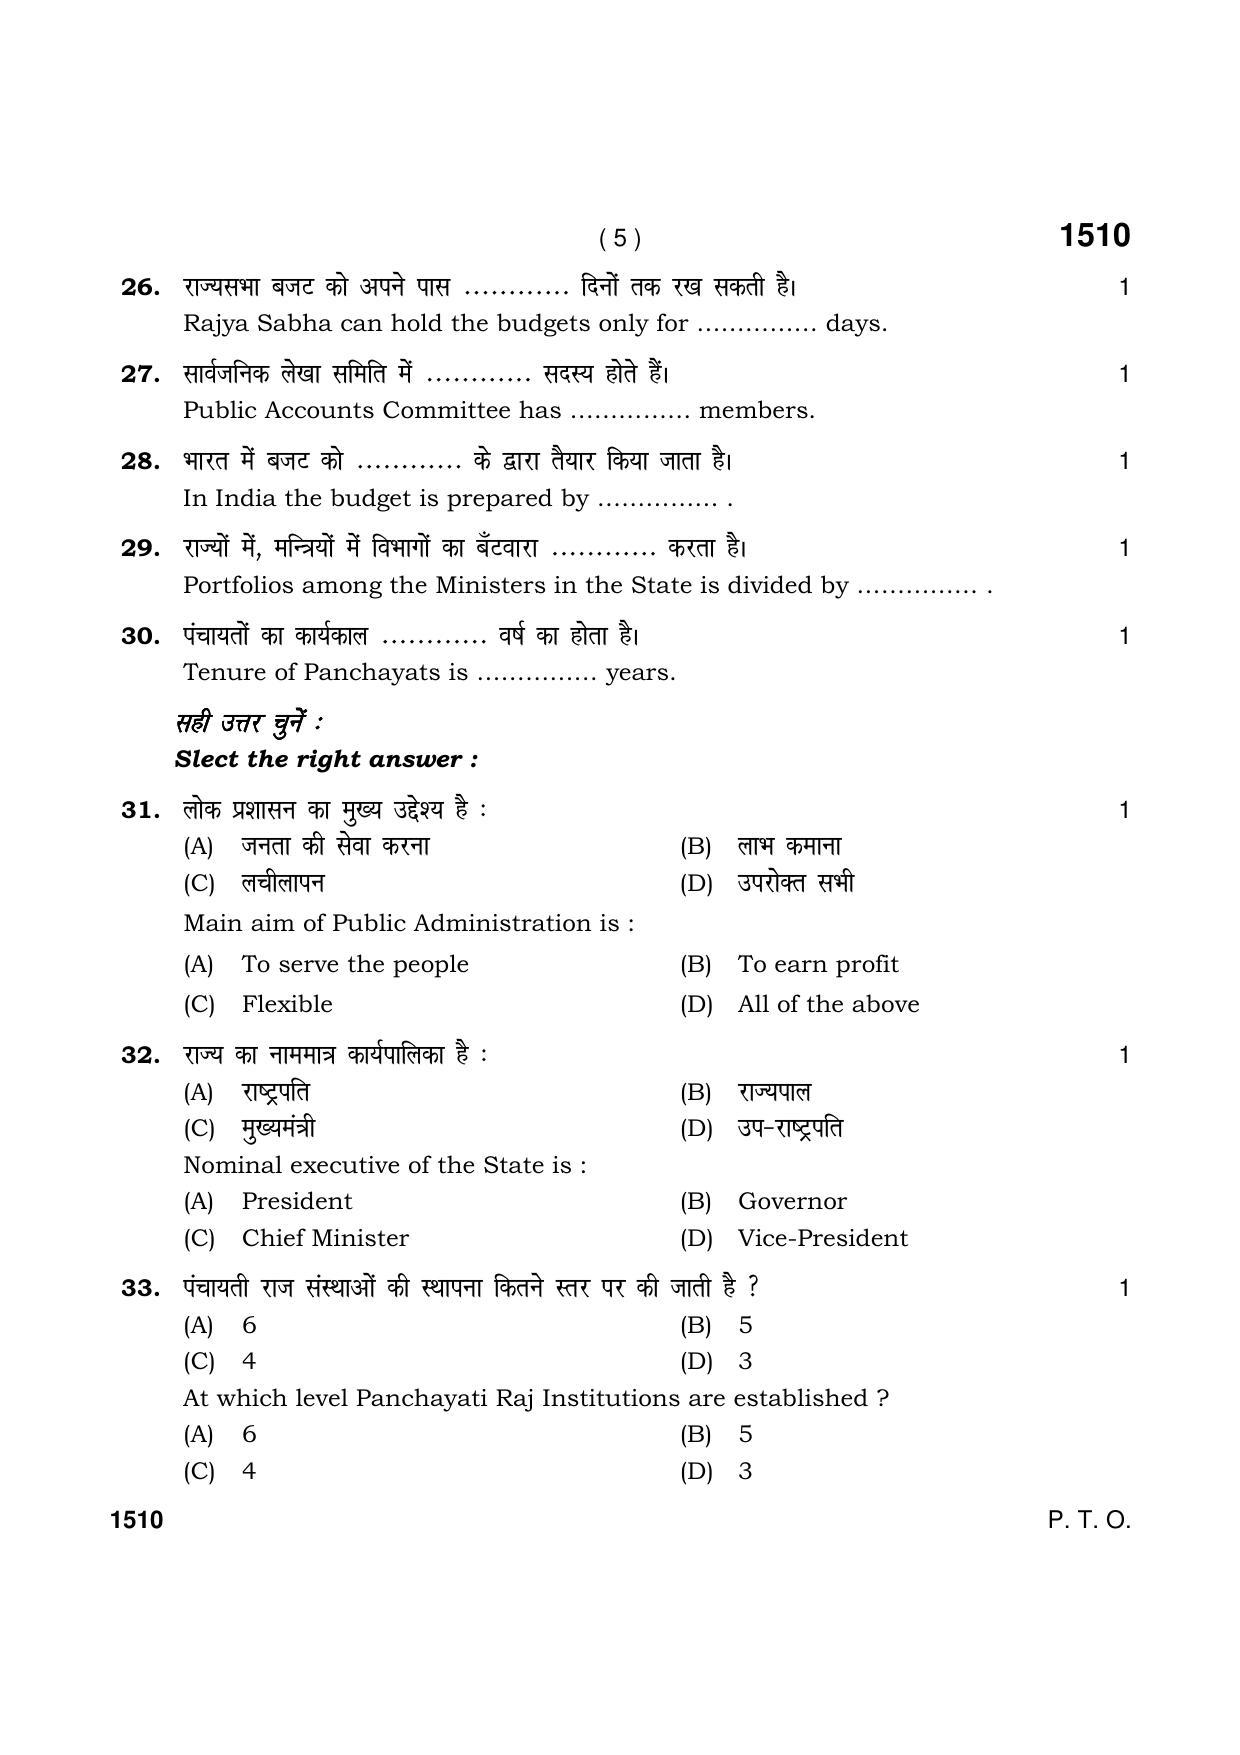 Haryana Board HBSE Class 11 Pub. Administration 2021 Question Paper - Page 5